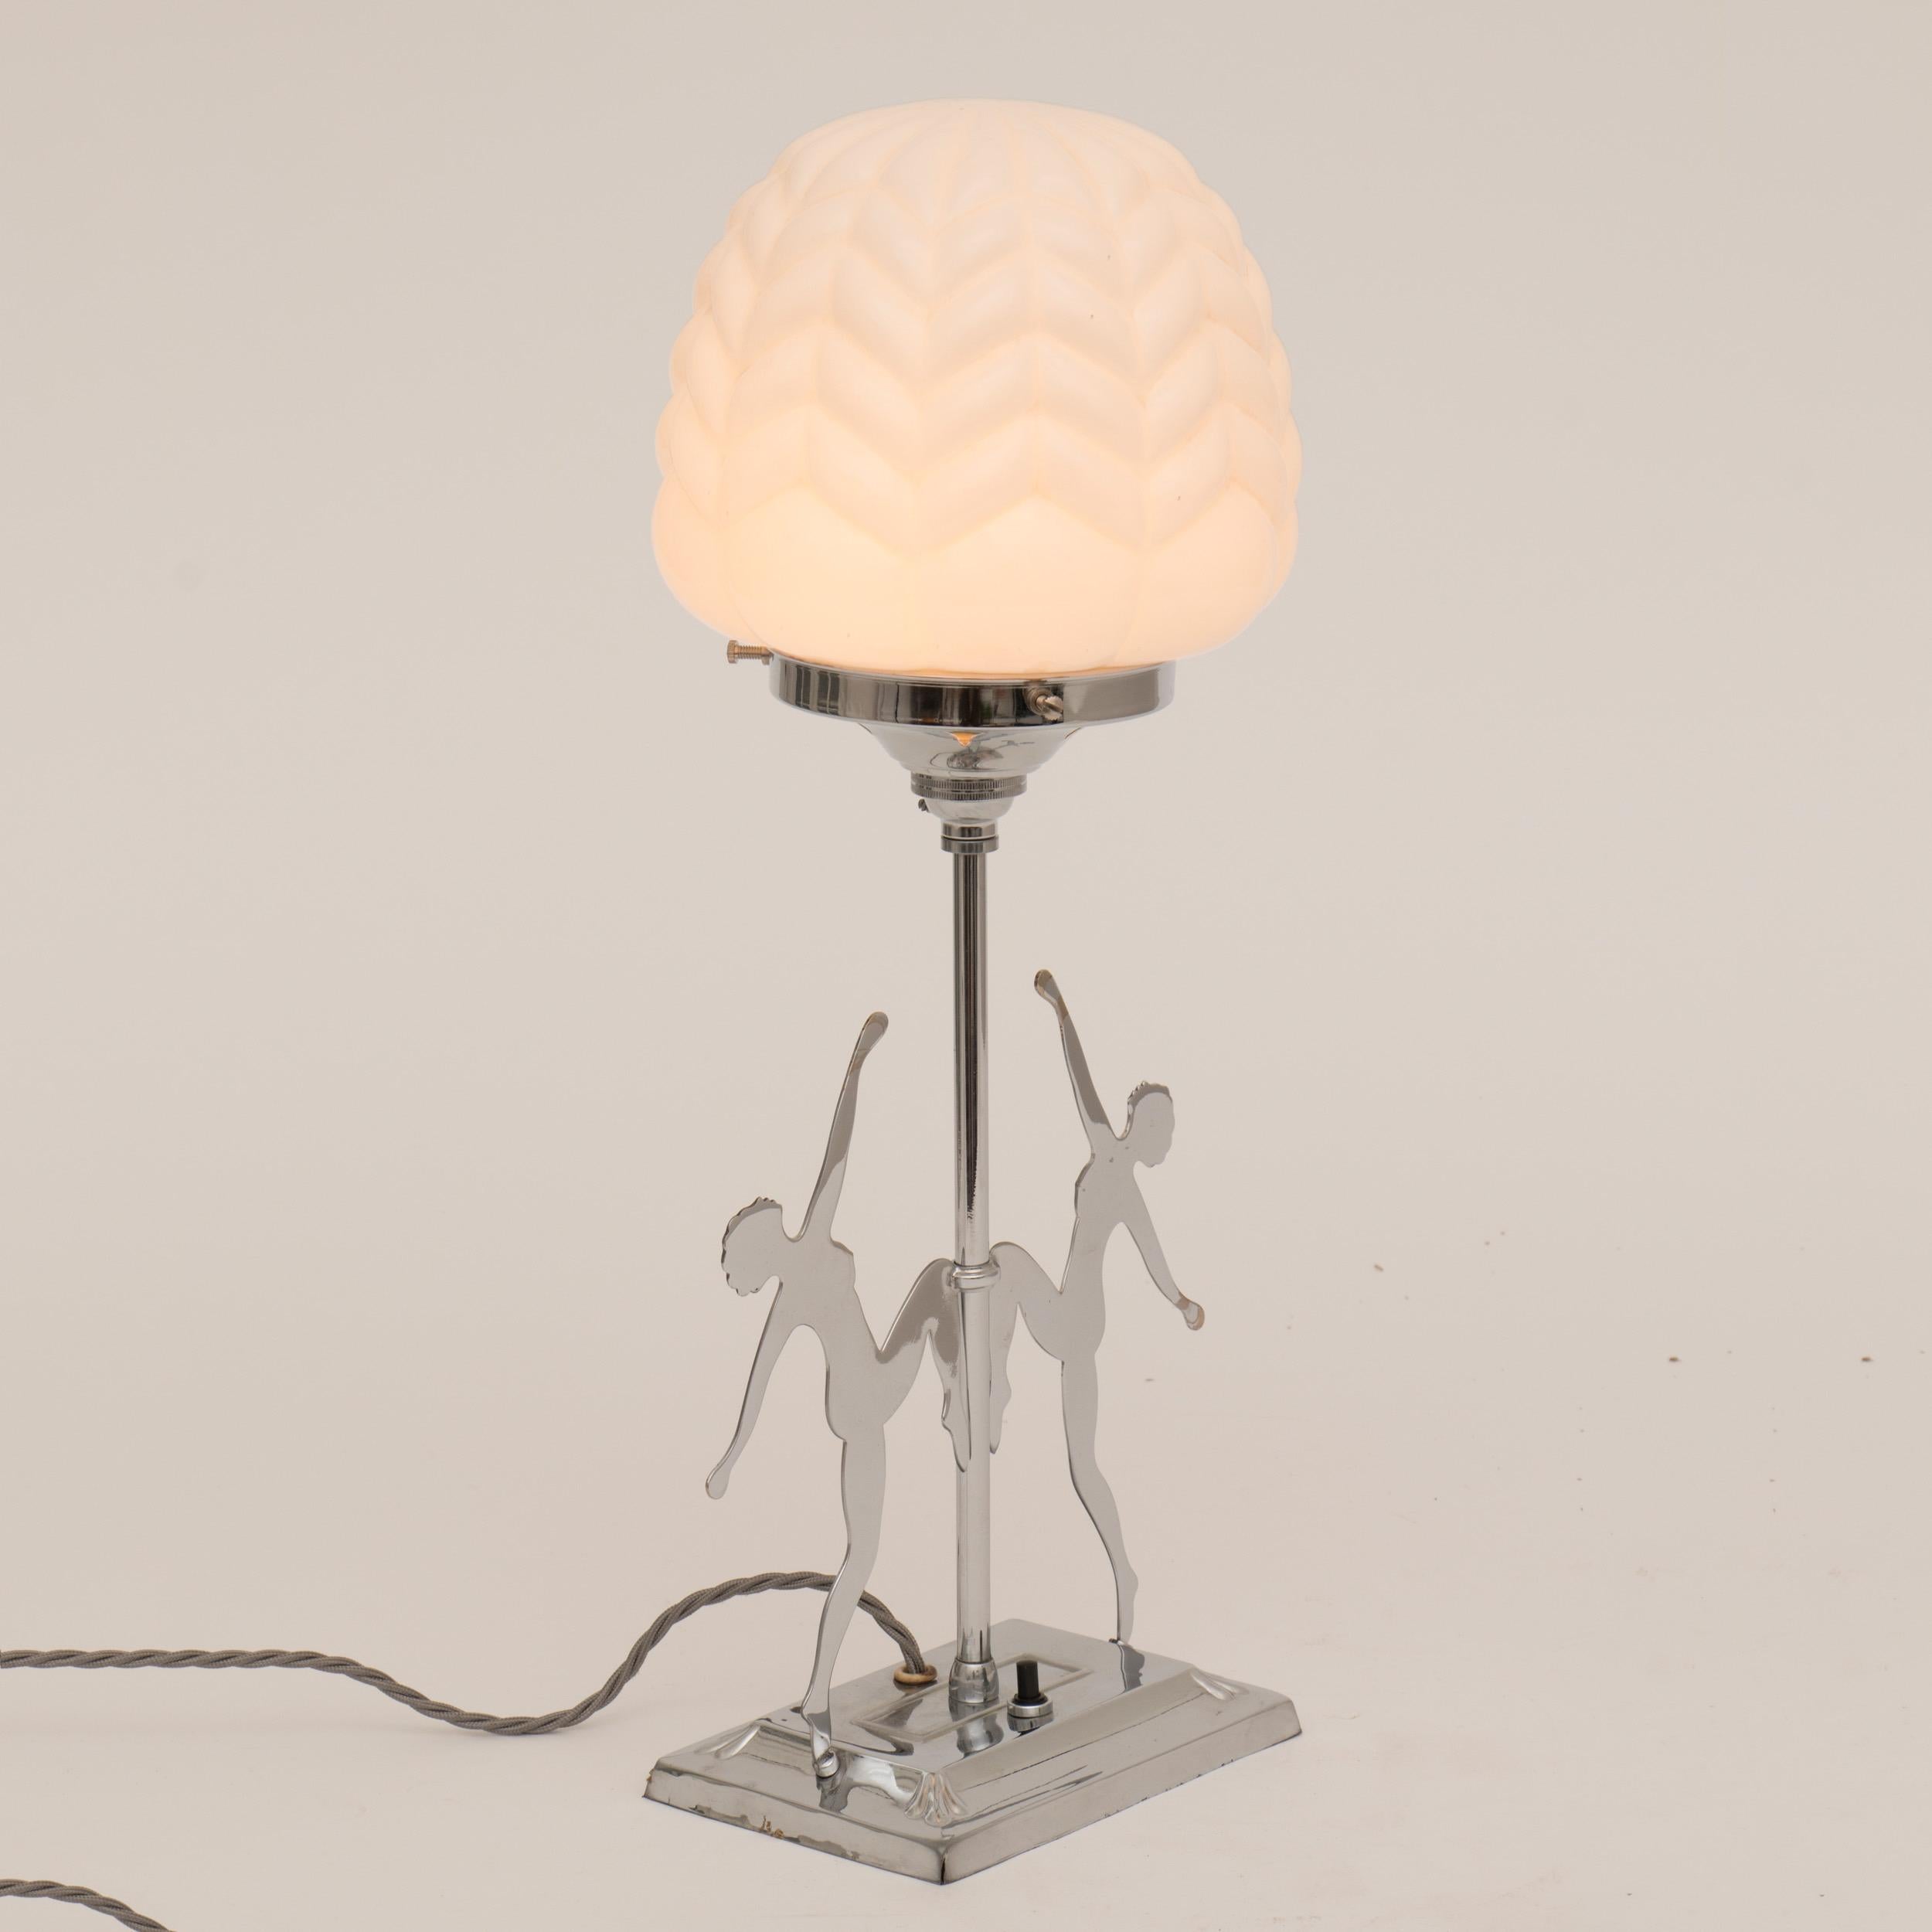 An Art Deco polished chrome table lamp with two dancing female silhouetted figures topped with a chevron pattered white glass shade
Measures: H 47cm, W 21cm, D 17cm
British, circa 1930.